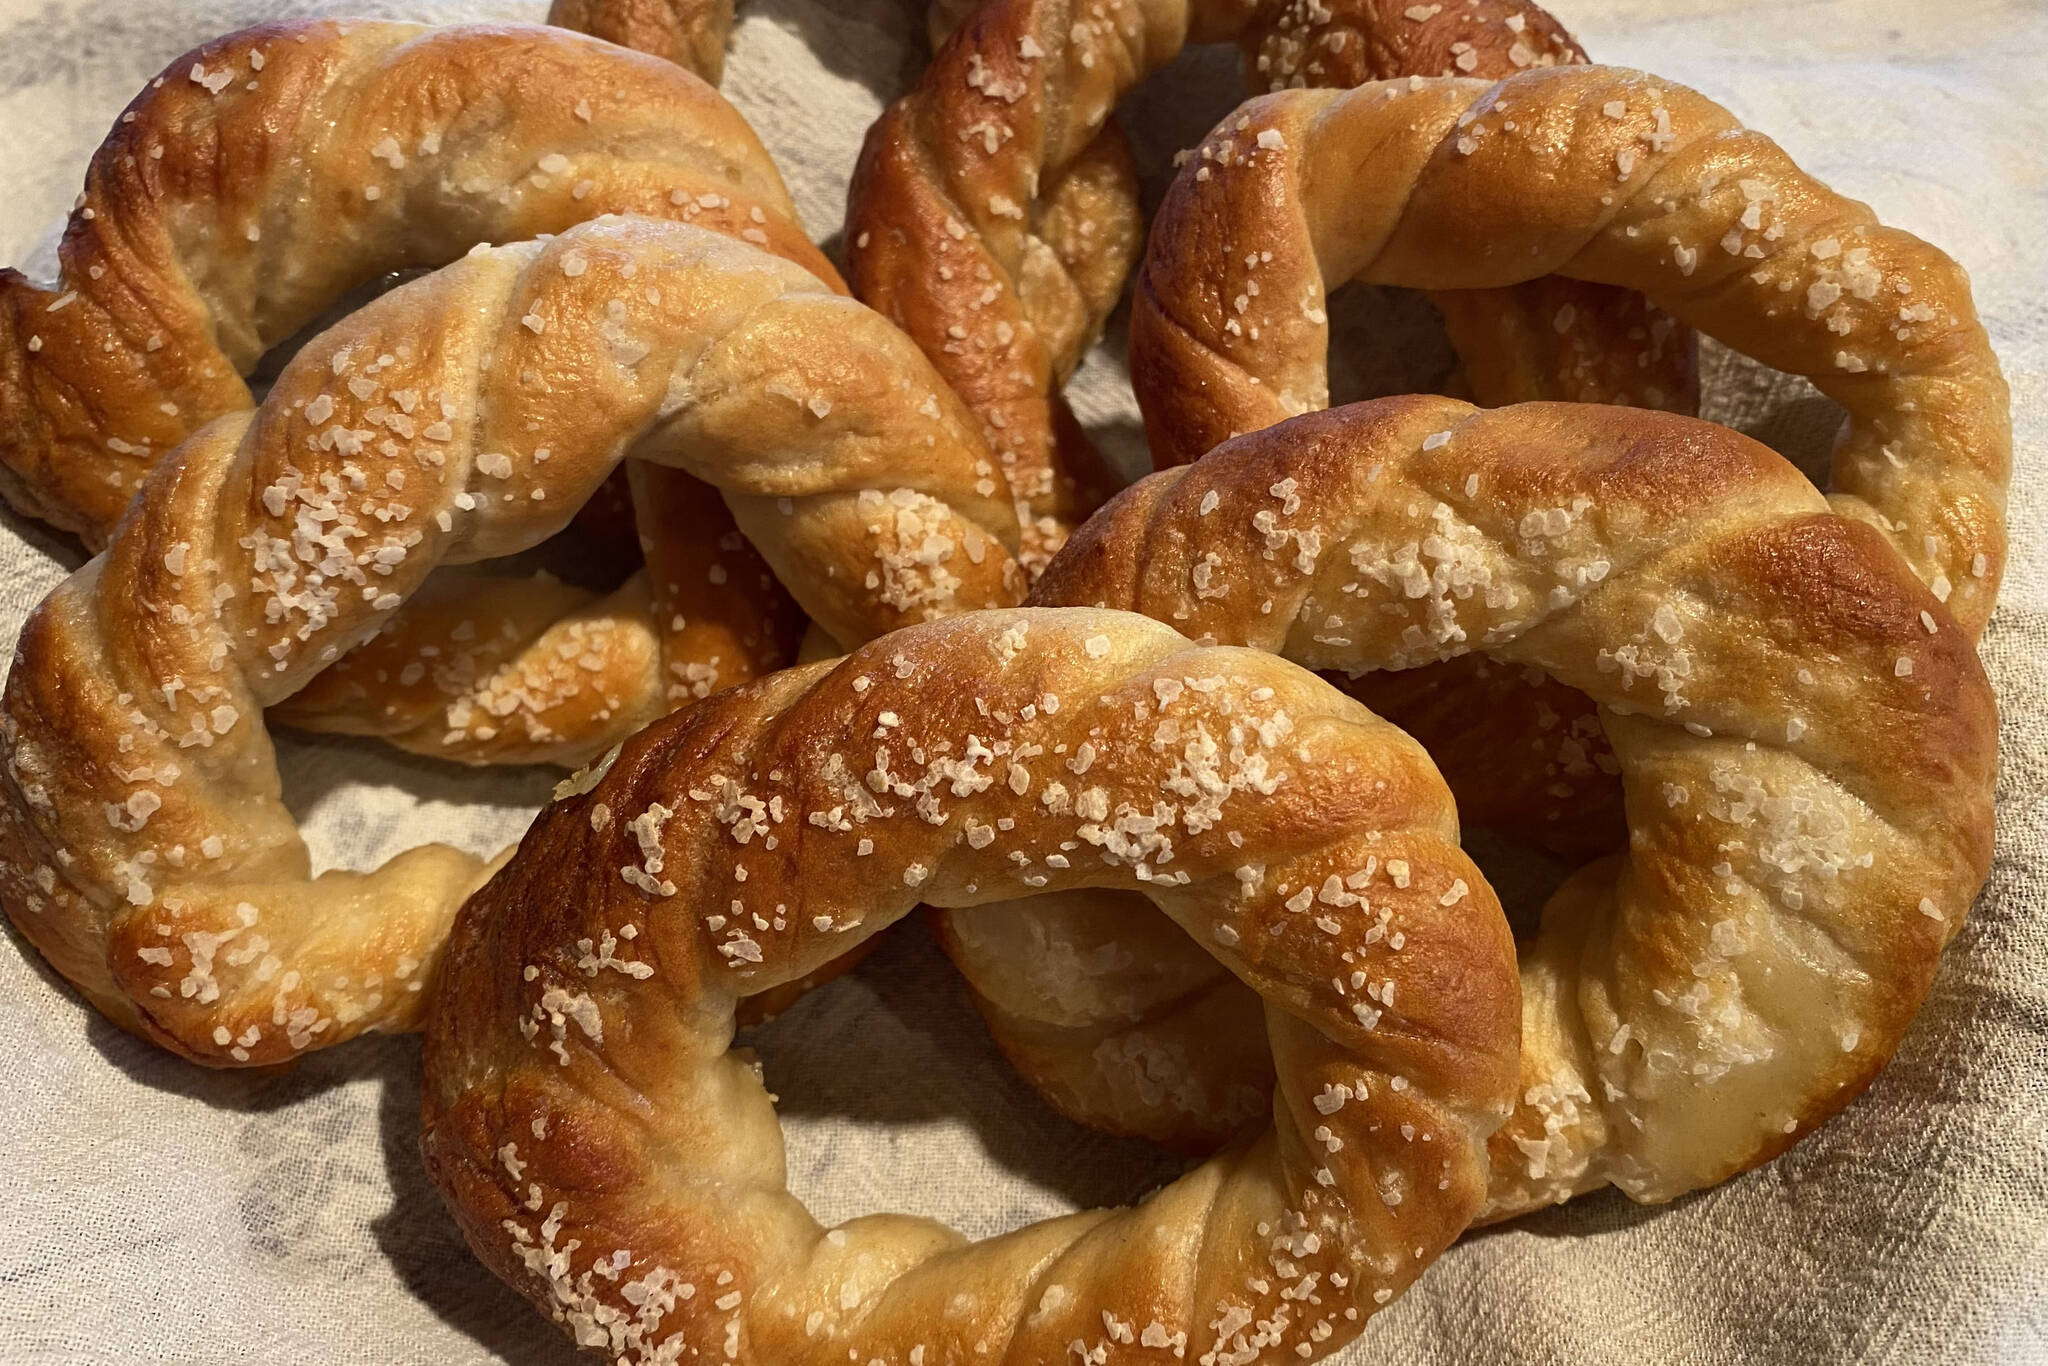 Chewy soft pretzels are easy to make at home. (Photo by Tressa Dale/Penisula Clarion)
Chewy soft pretzels are easy to make at home. (Photo by Tressa Dale/Peninsula Clarion)